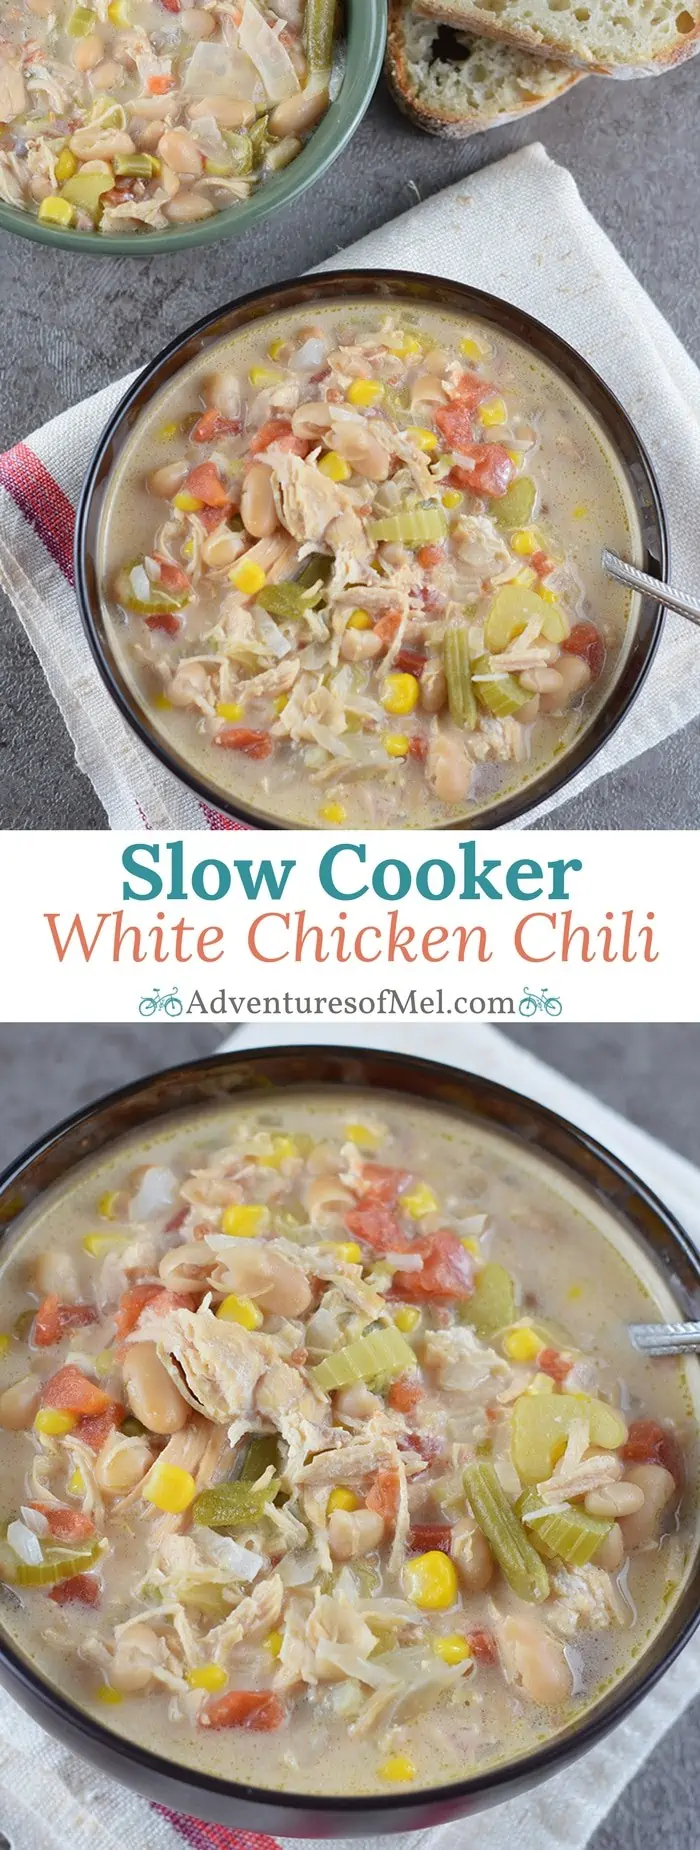 White Chicken Chili in the slow cooker (or Instant Pot) makes an easy family meal. Filled with vegetables, white beans, chicken, green chiles, and cheese.